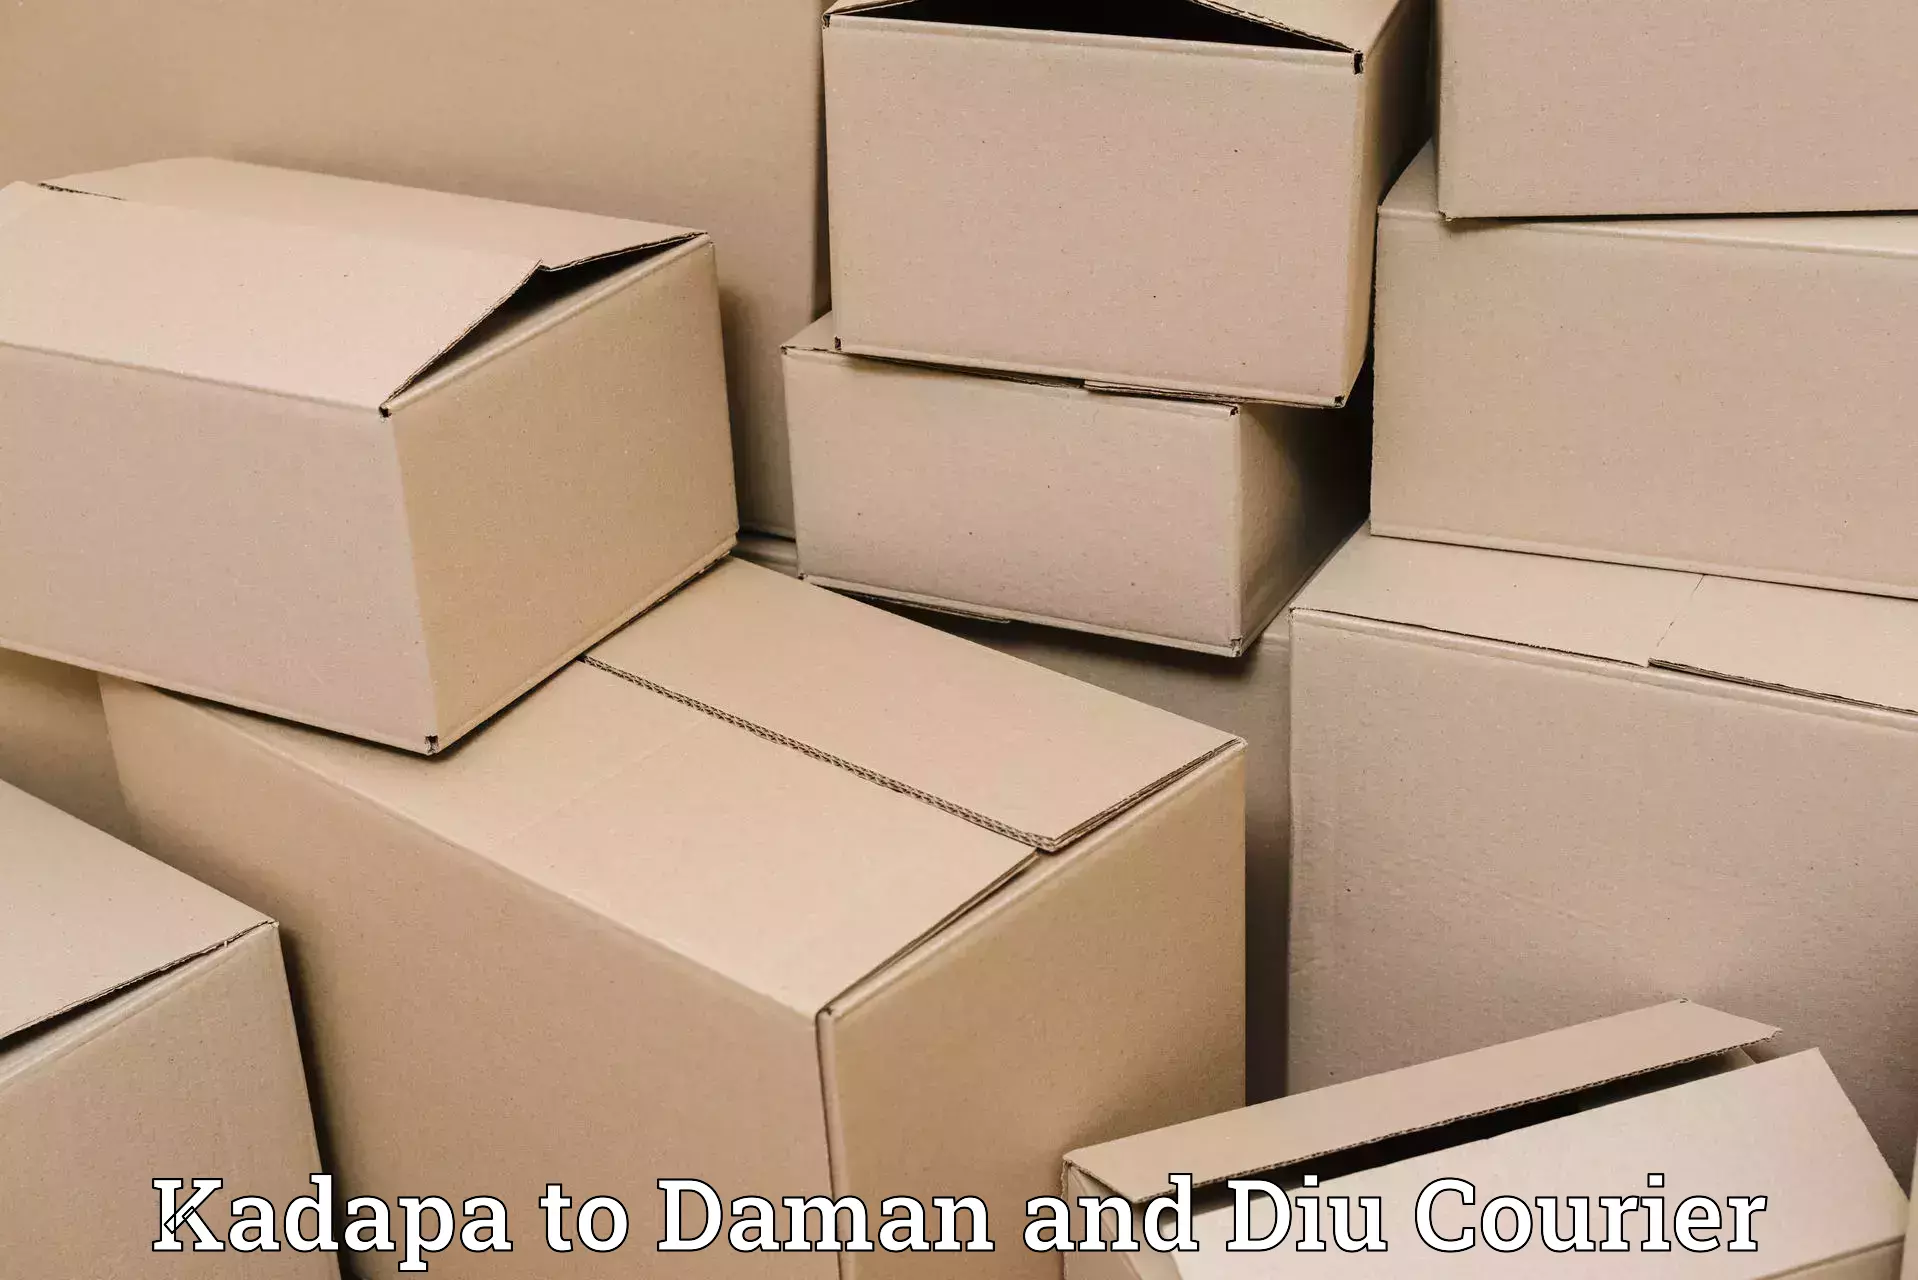 Sustainable delivery practices Kadapa to Daman and Diu